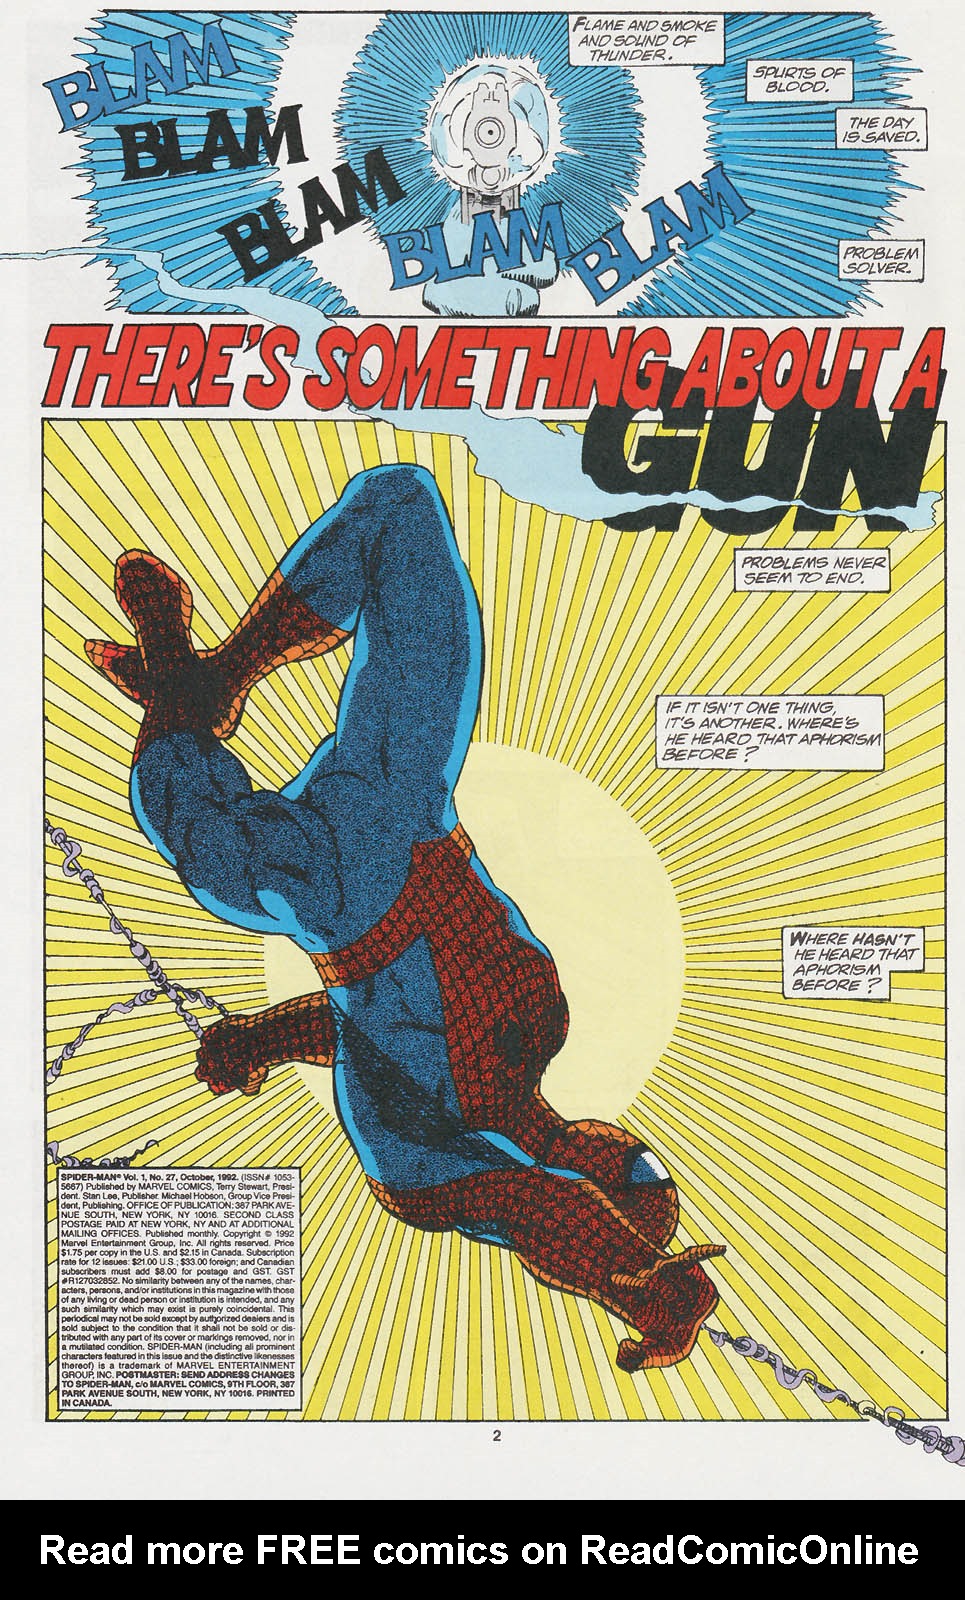 Spider-Man (1990) 27_-_Theres_Something_About_A_Gun_Part_1 Page 2